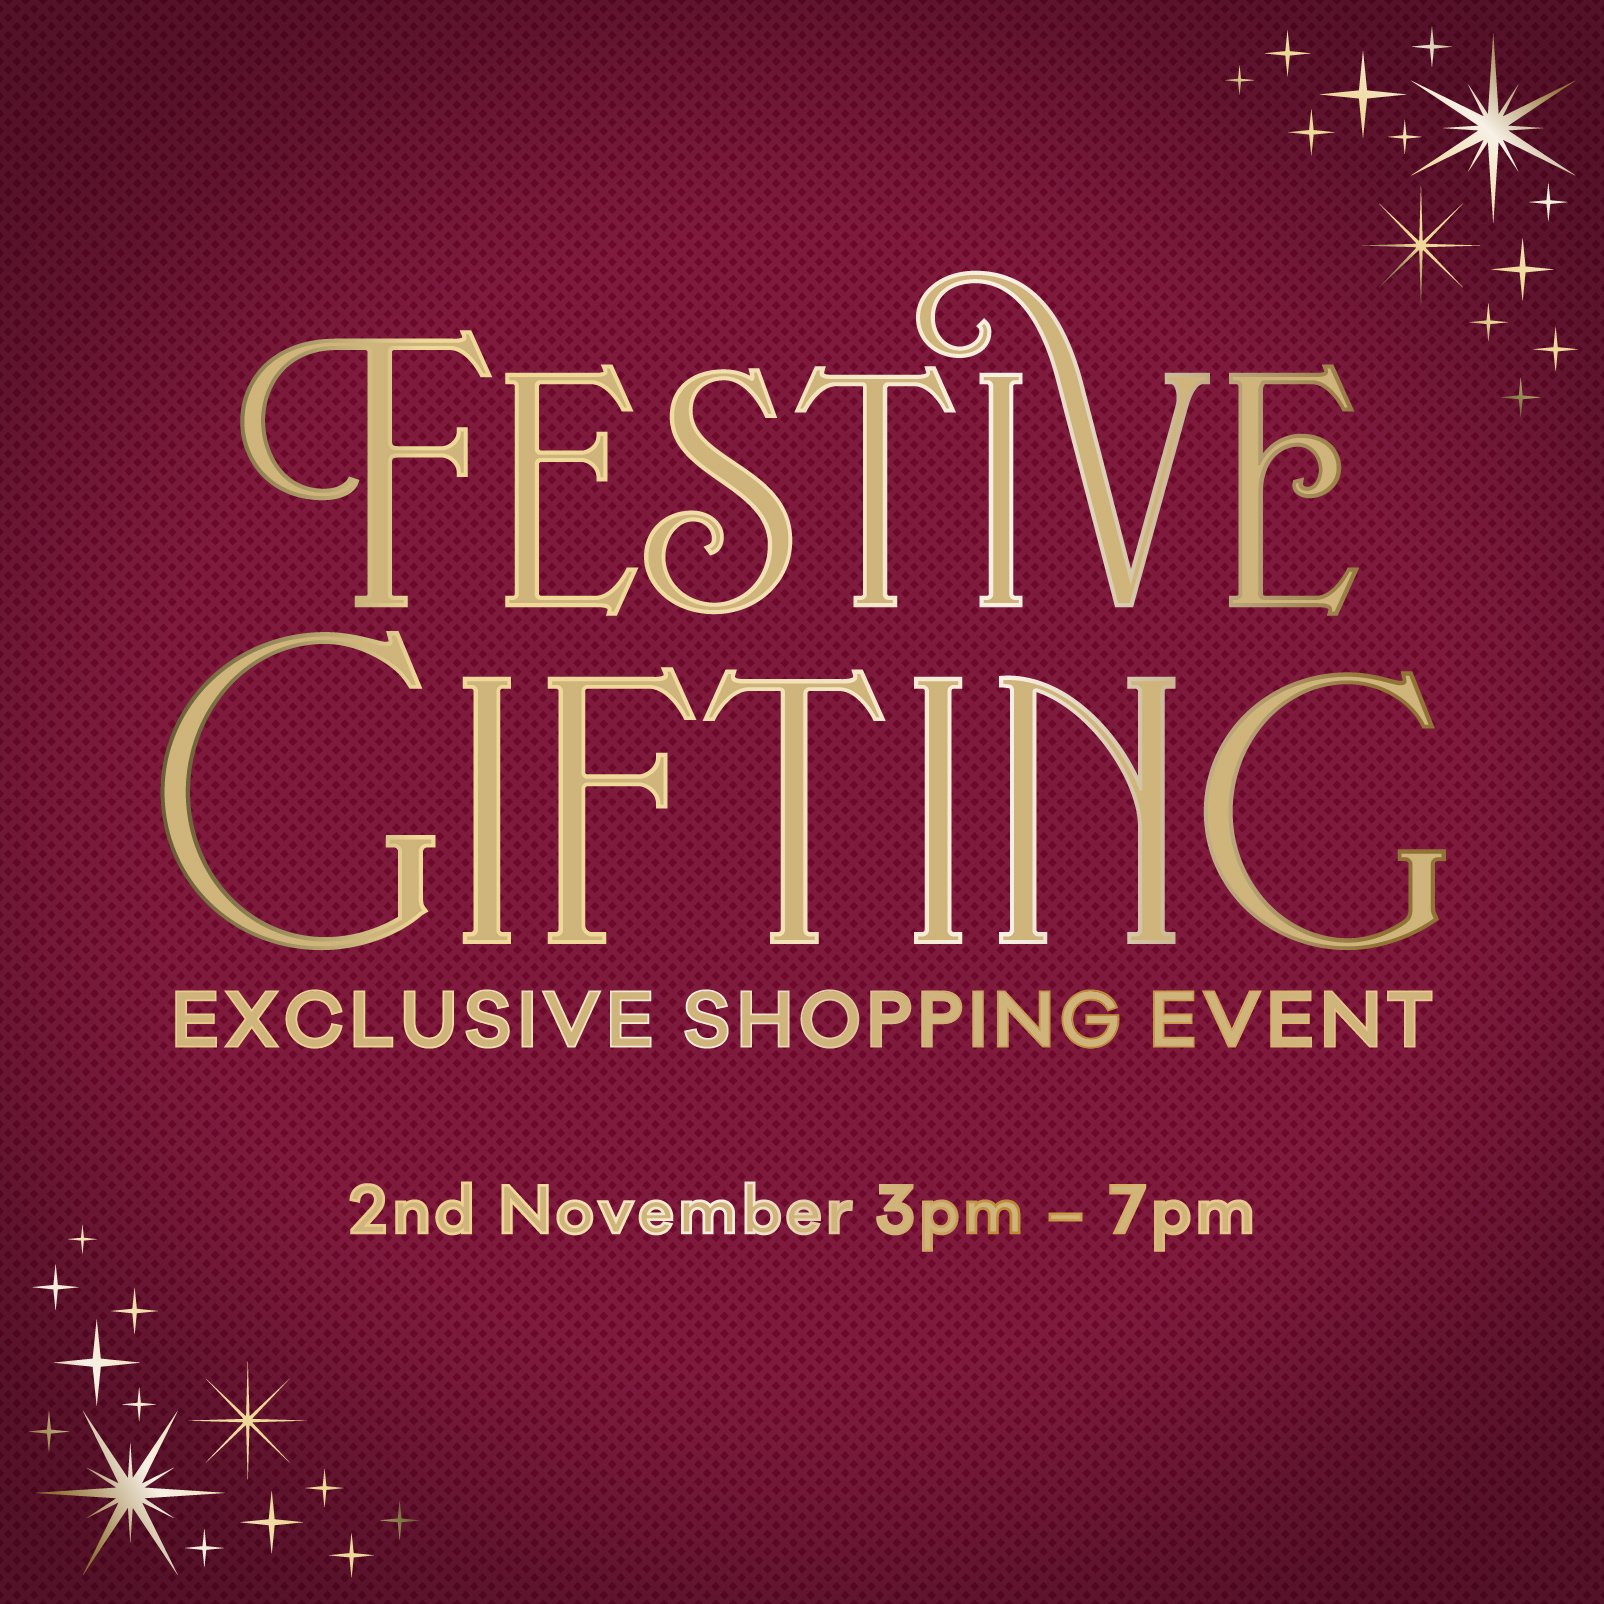 New festive gifting event coming to centre:mk